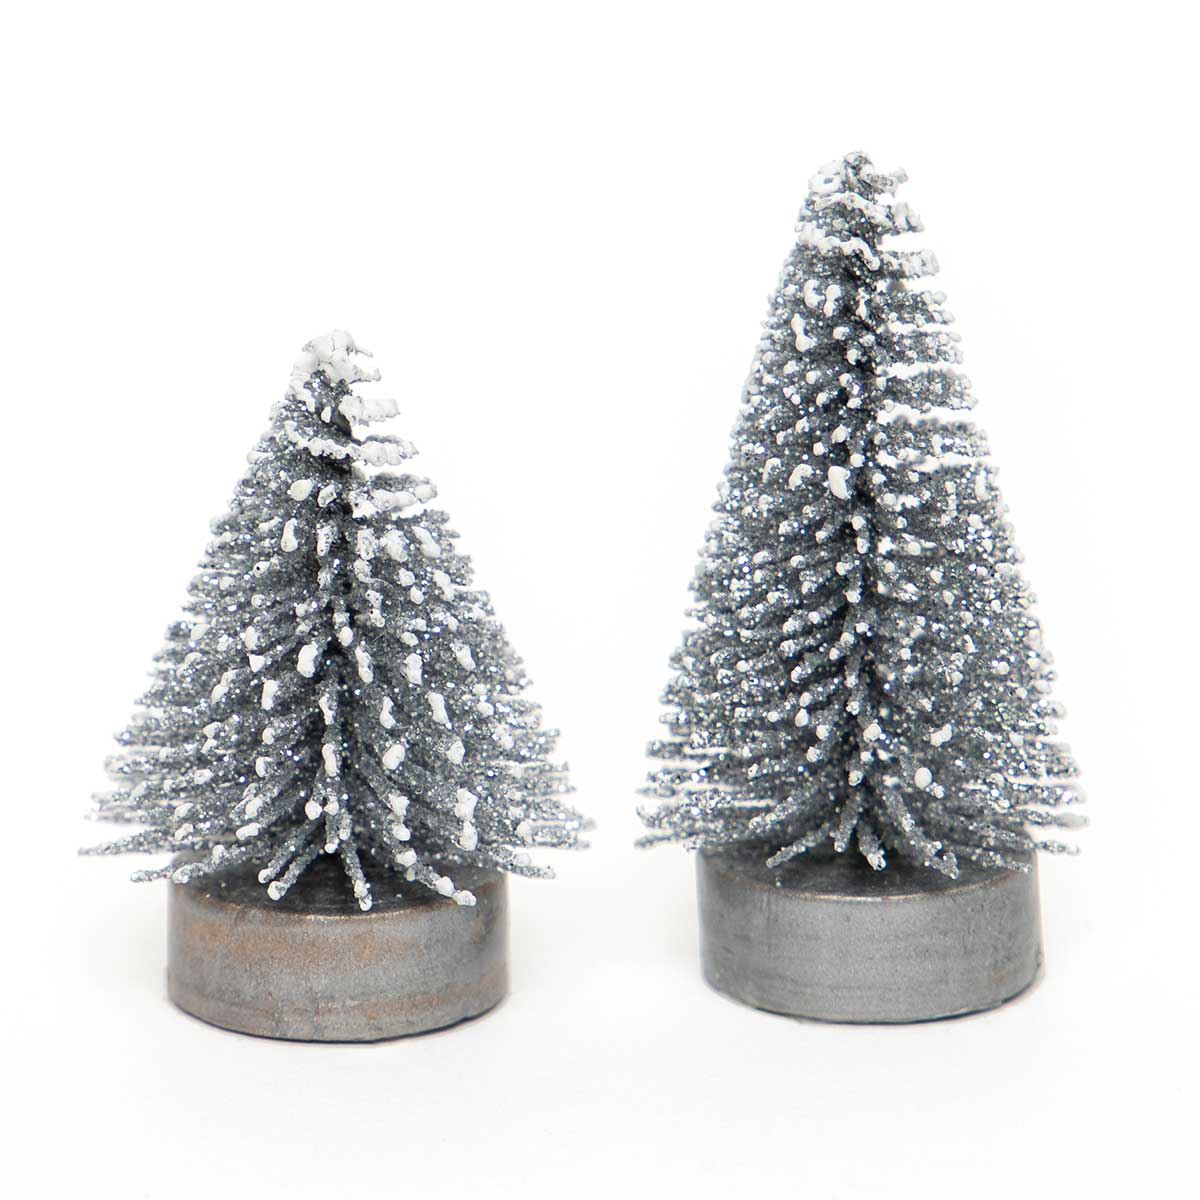 MINI BRISTLE TREE SILVER WITH SNOWY TIPS, GLITTER AND WOOD BASE